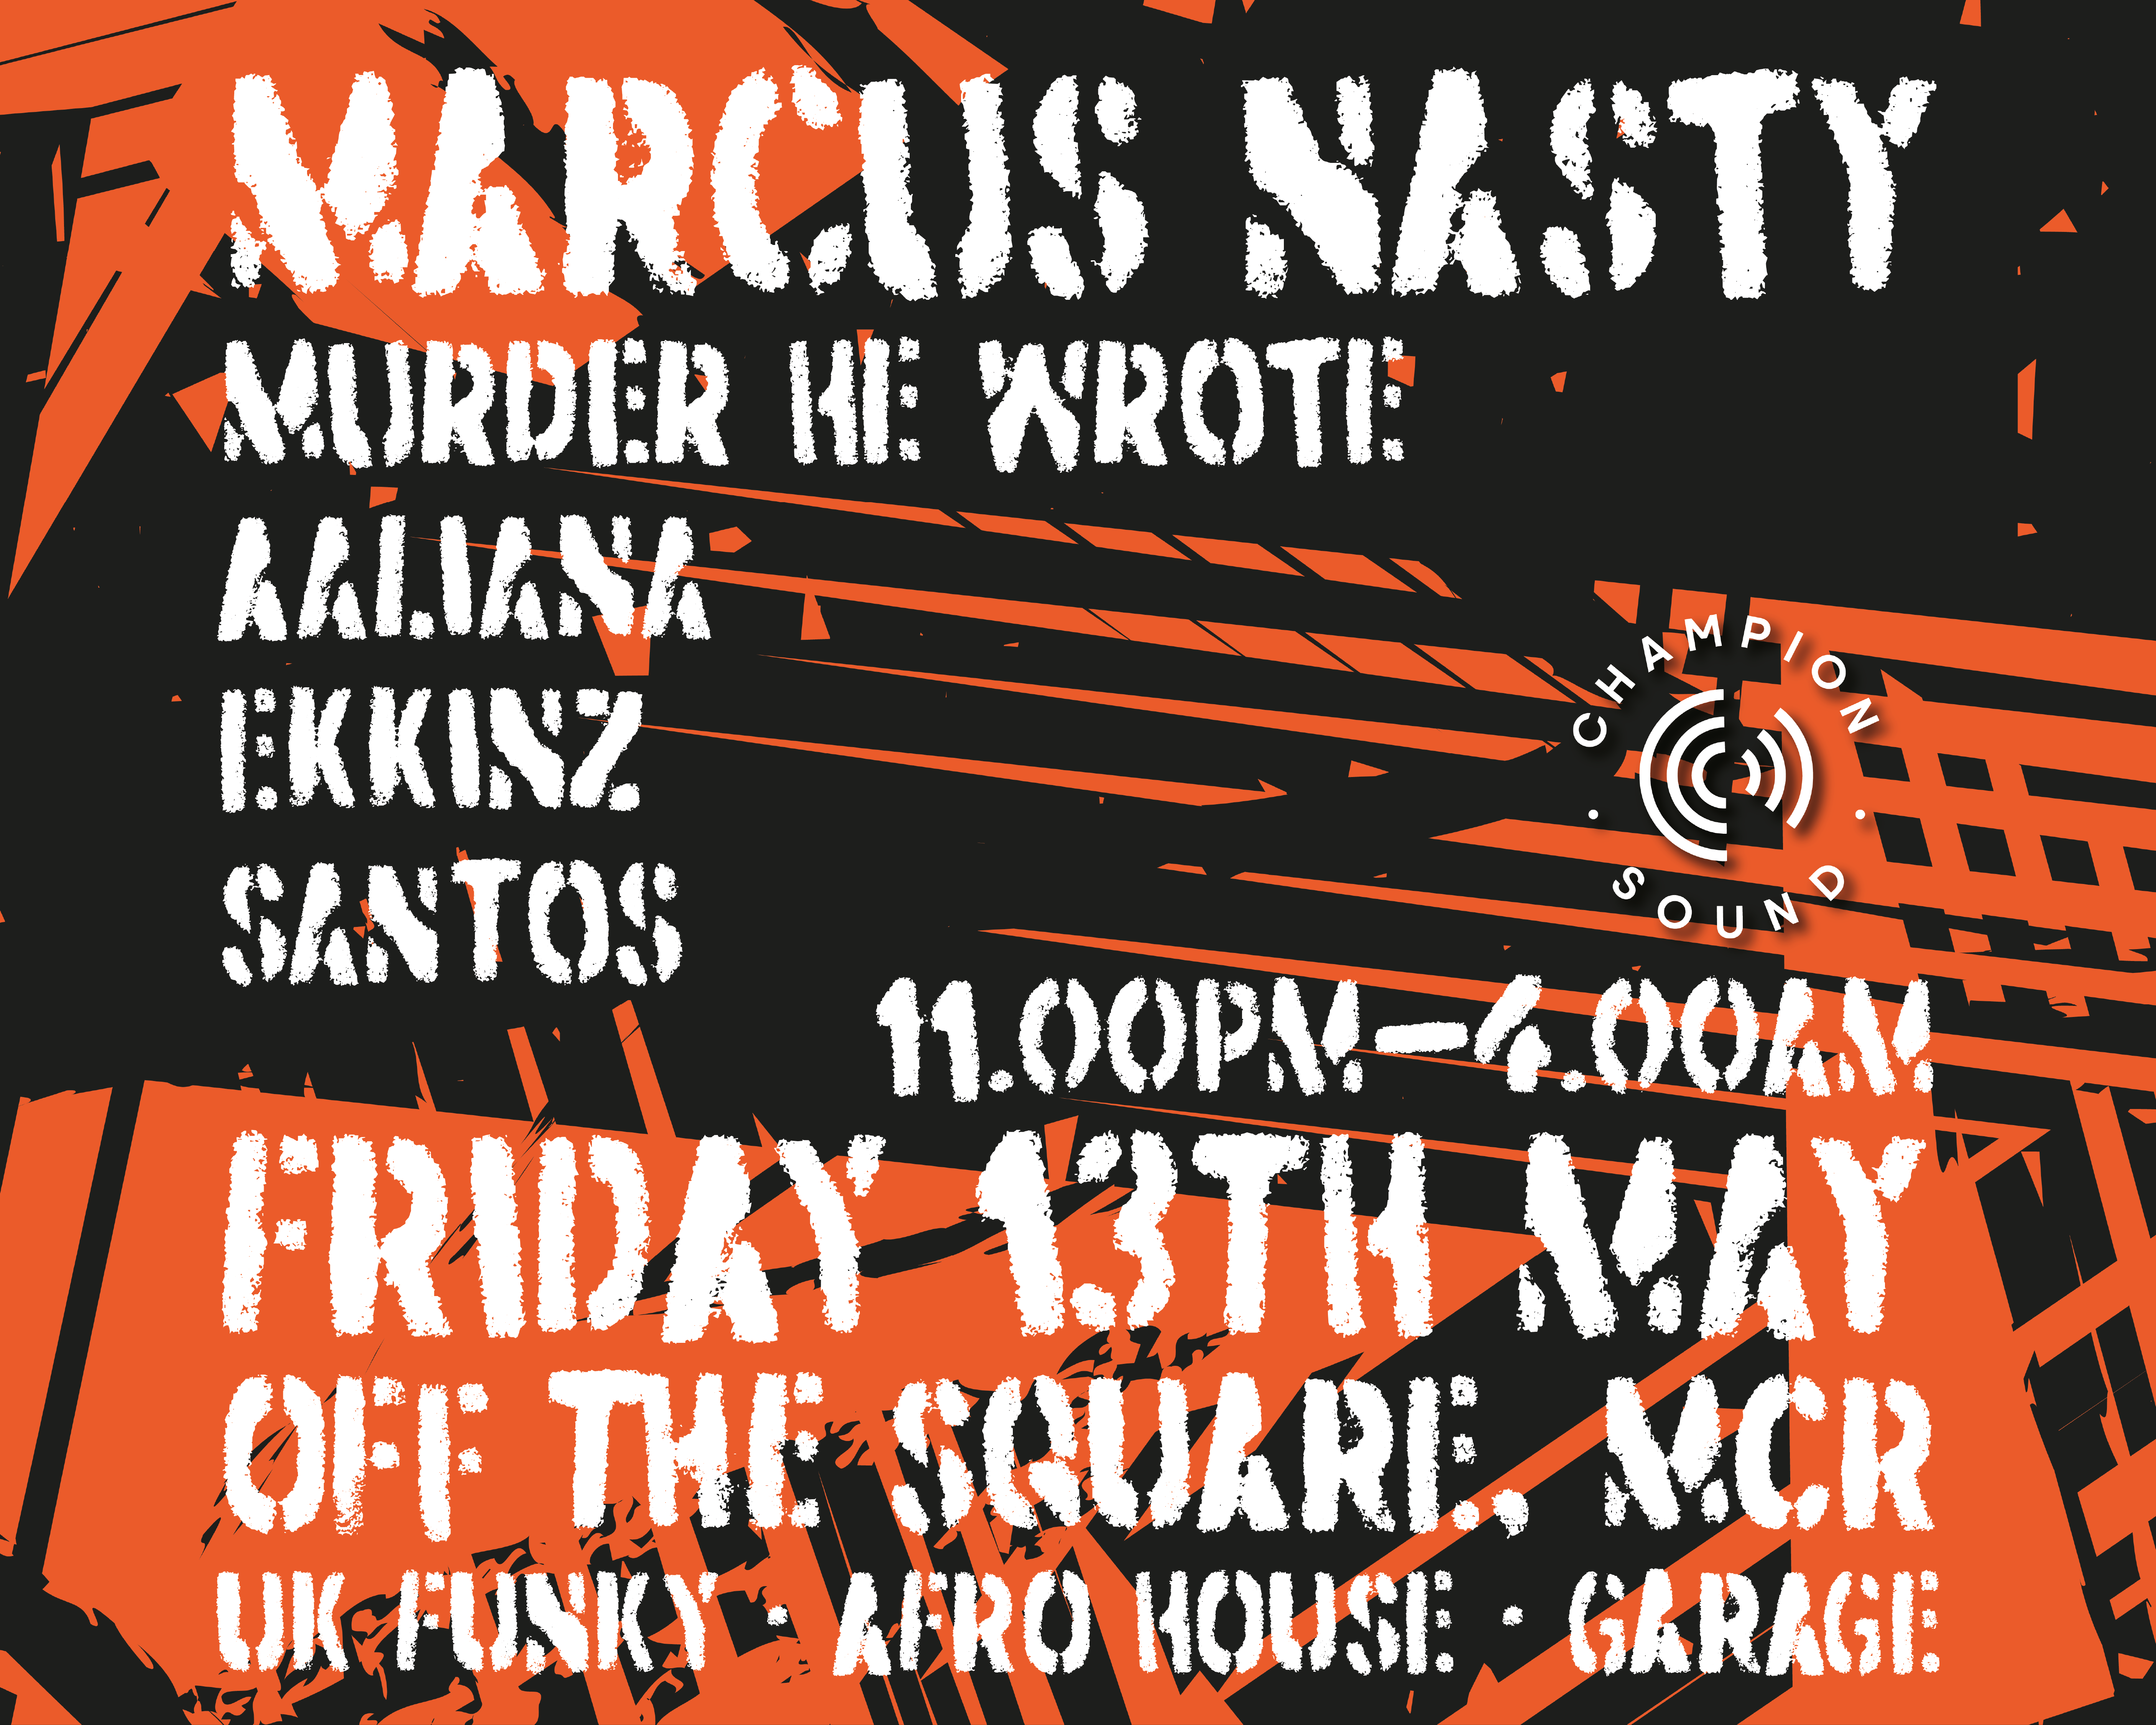 UK Funky Party with Marcus Nasty, Murder He Wrote + more - Página frontal